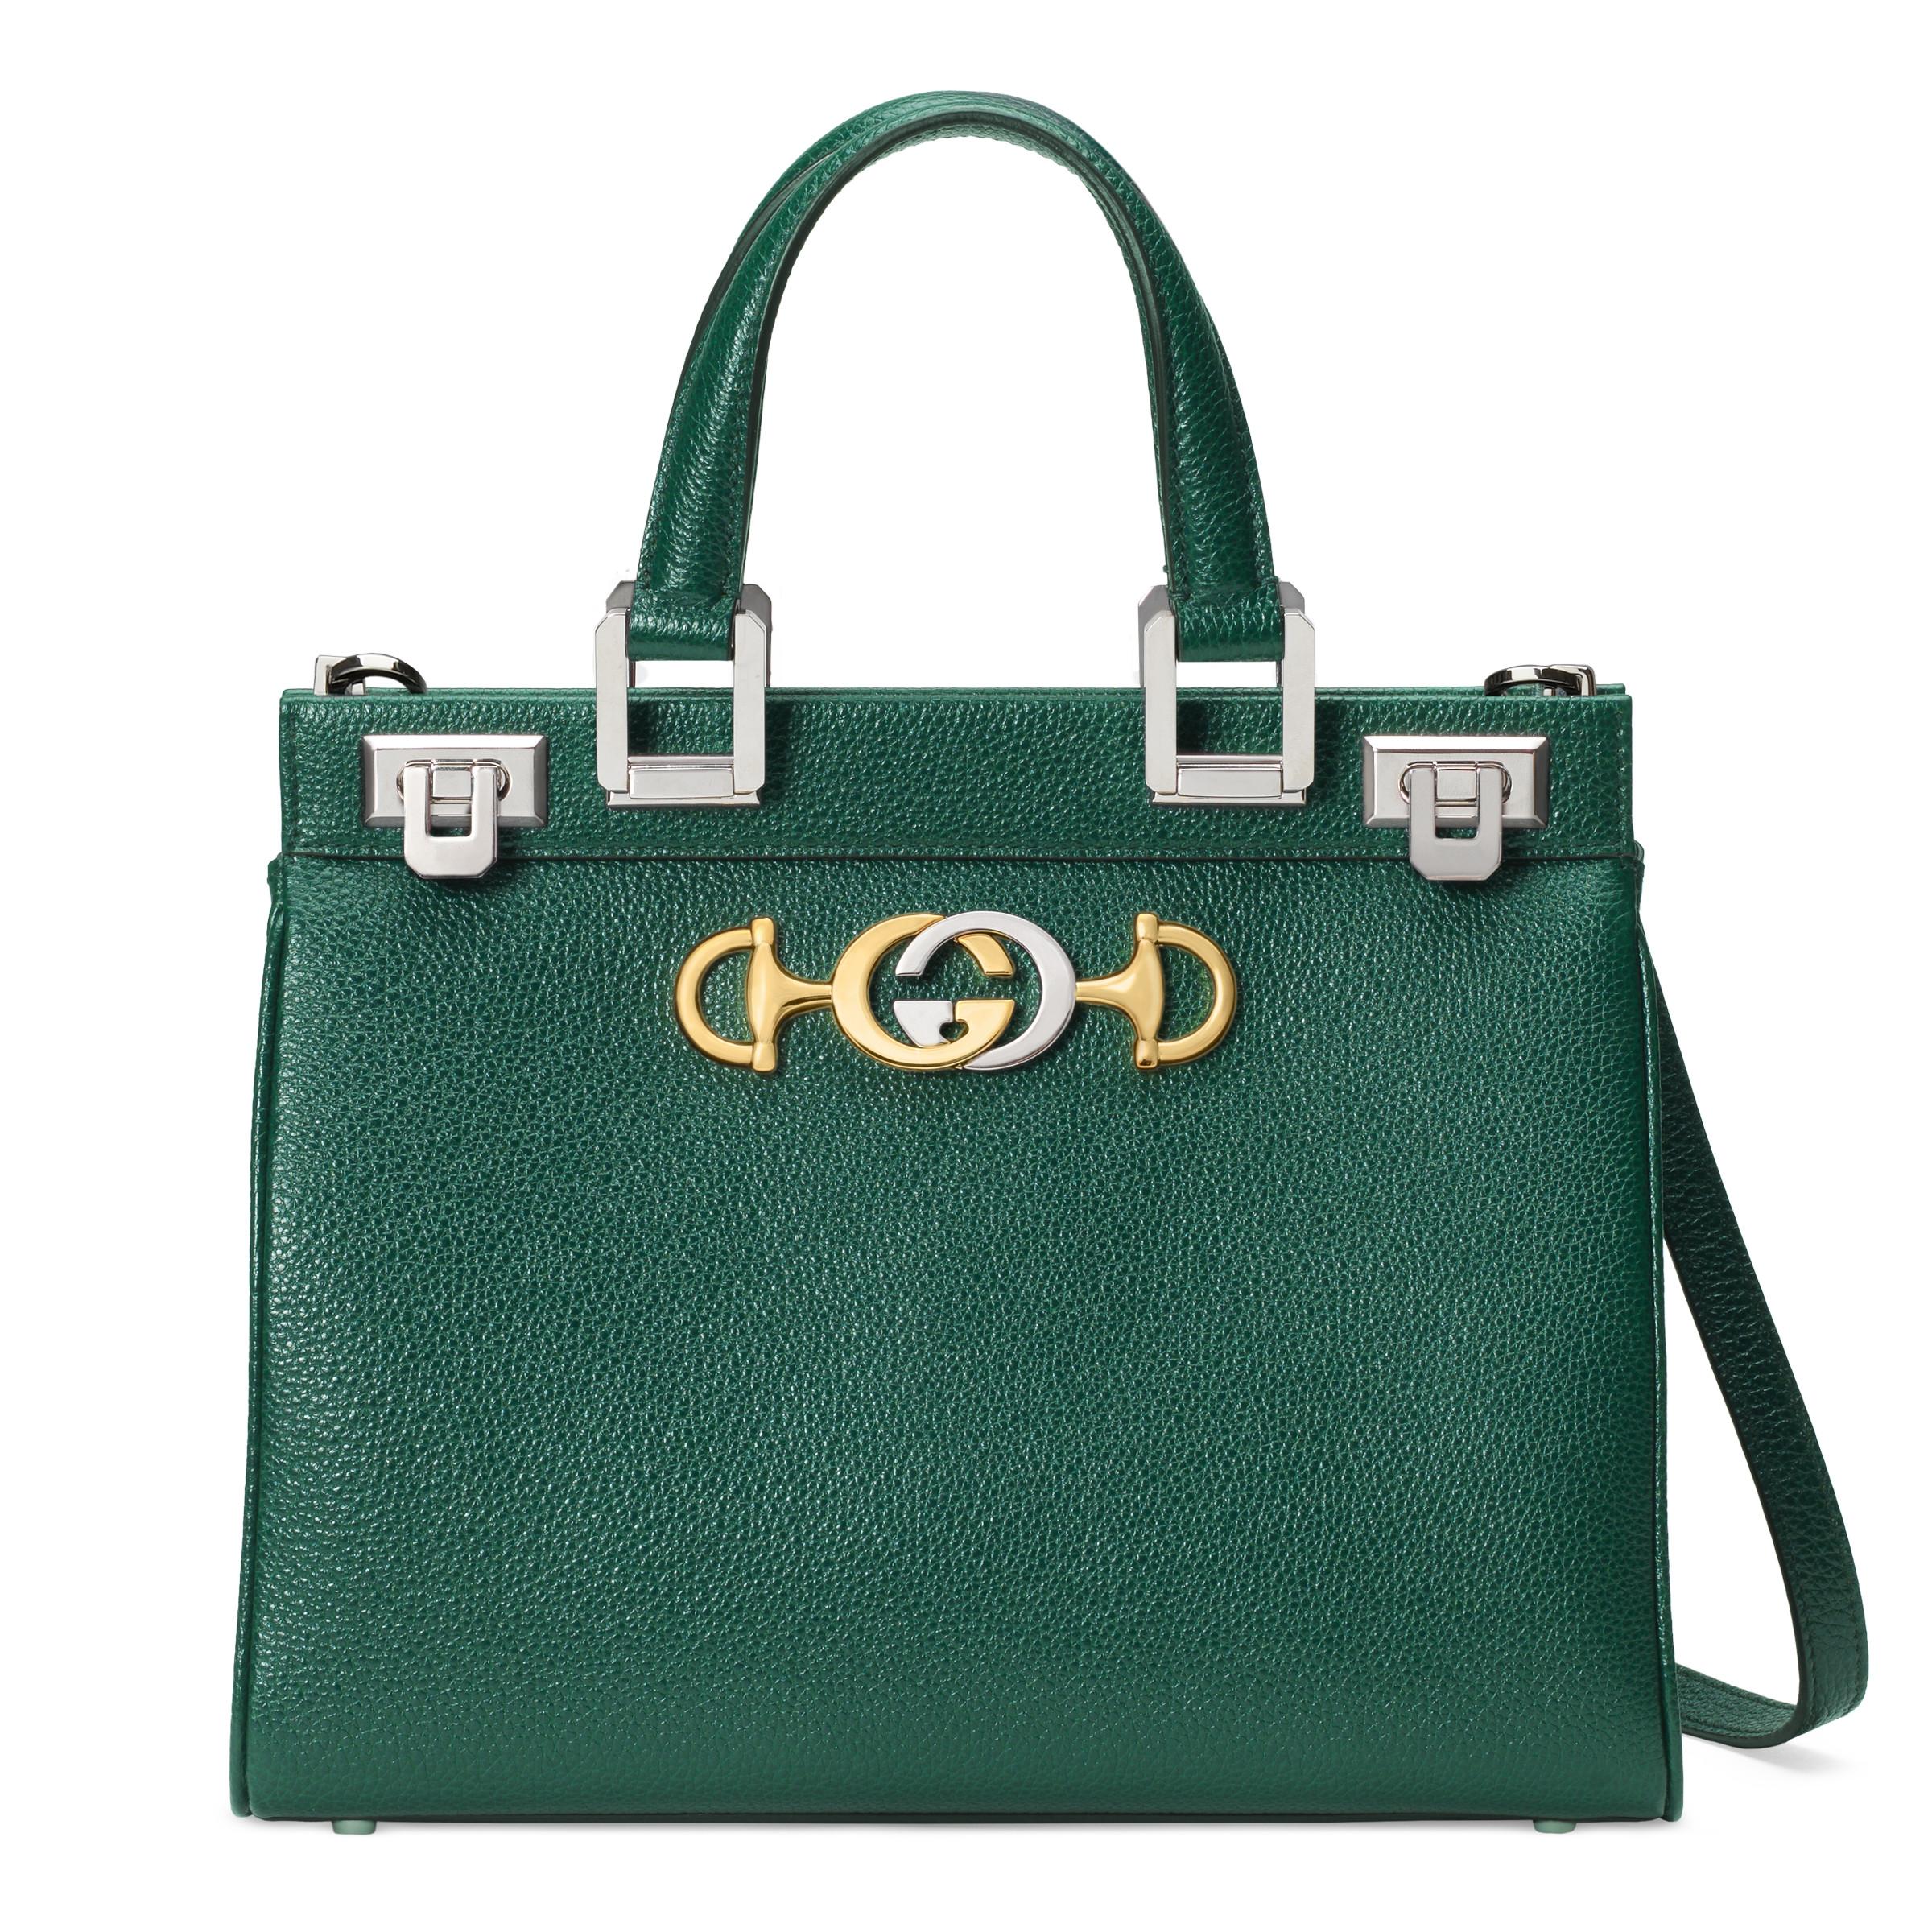 Gucci Zumi Grainy Leather Small Top Handle Bag in Green - Lyst